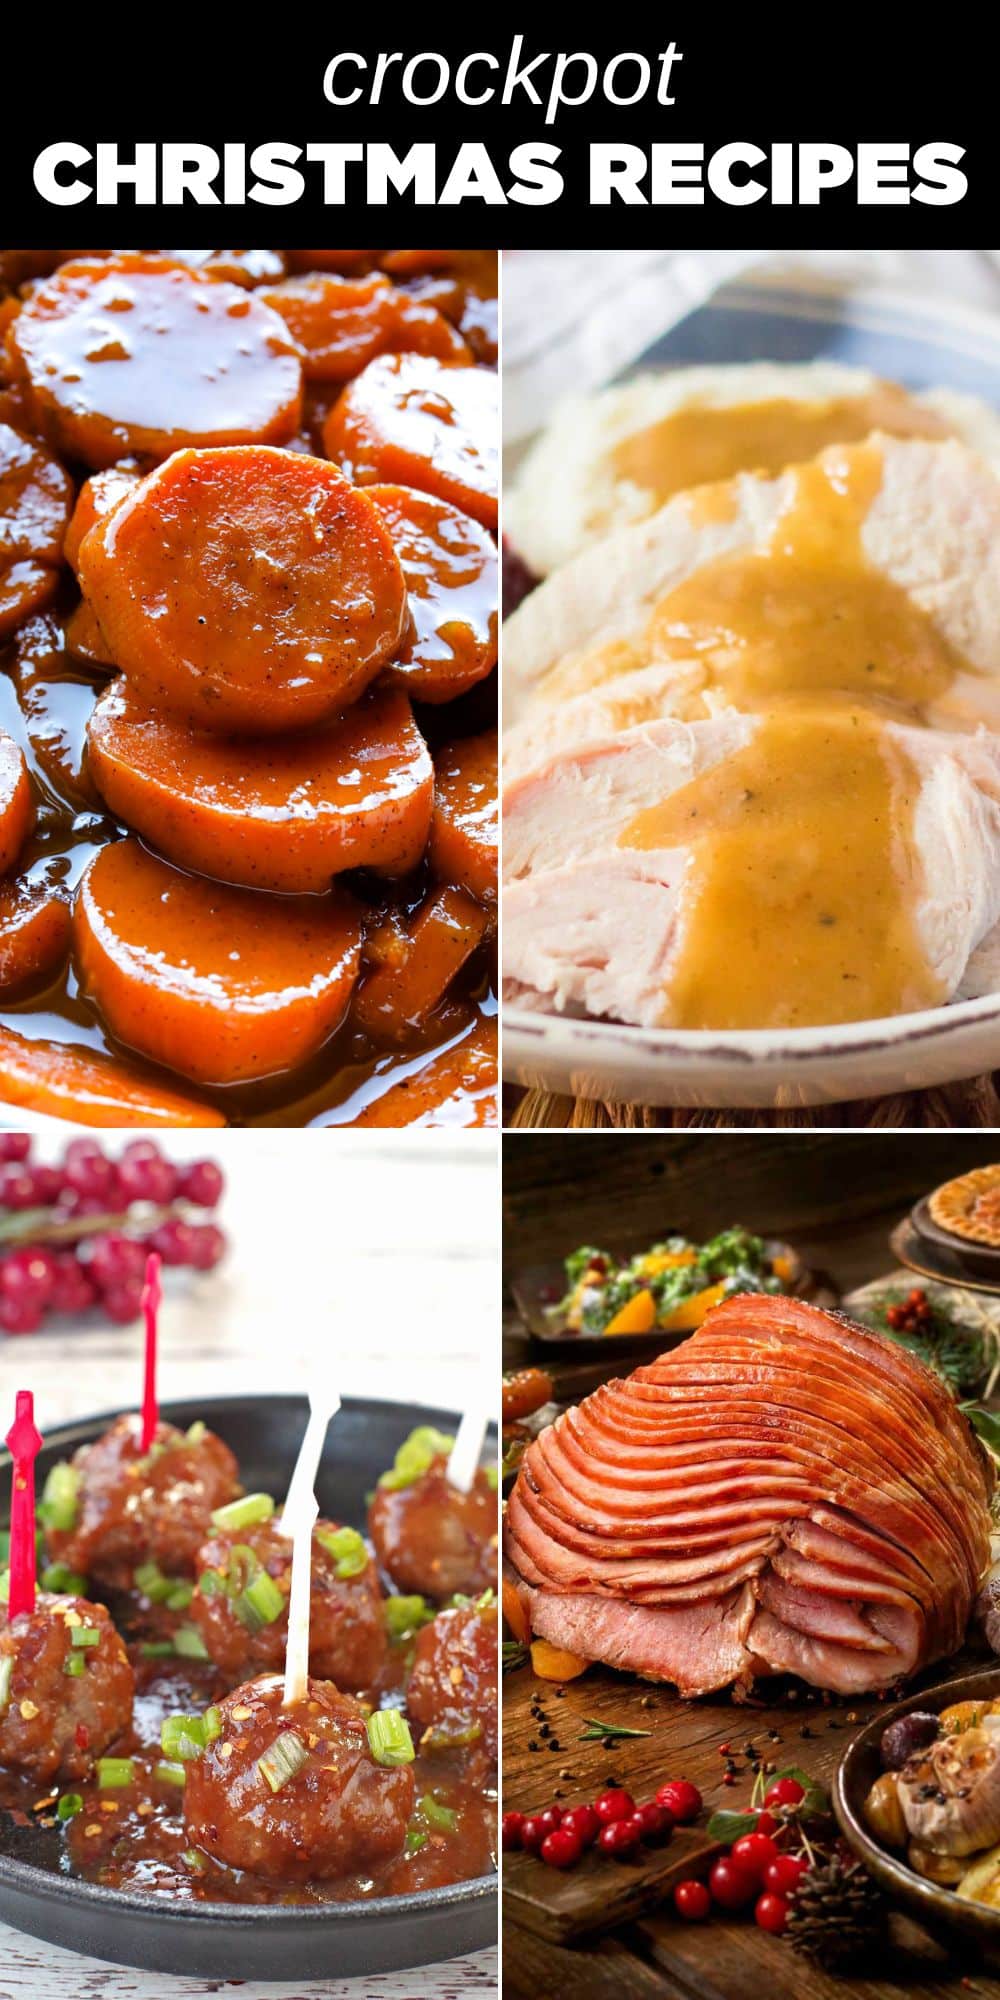 Make your holiday feast a little easier with these Christmas Crockpot Recipes. From tasty main courses and sides to sweet treats and more, these recipes are sure to make your holiday cooking a breeze.